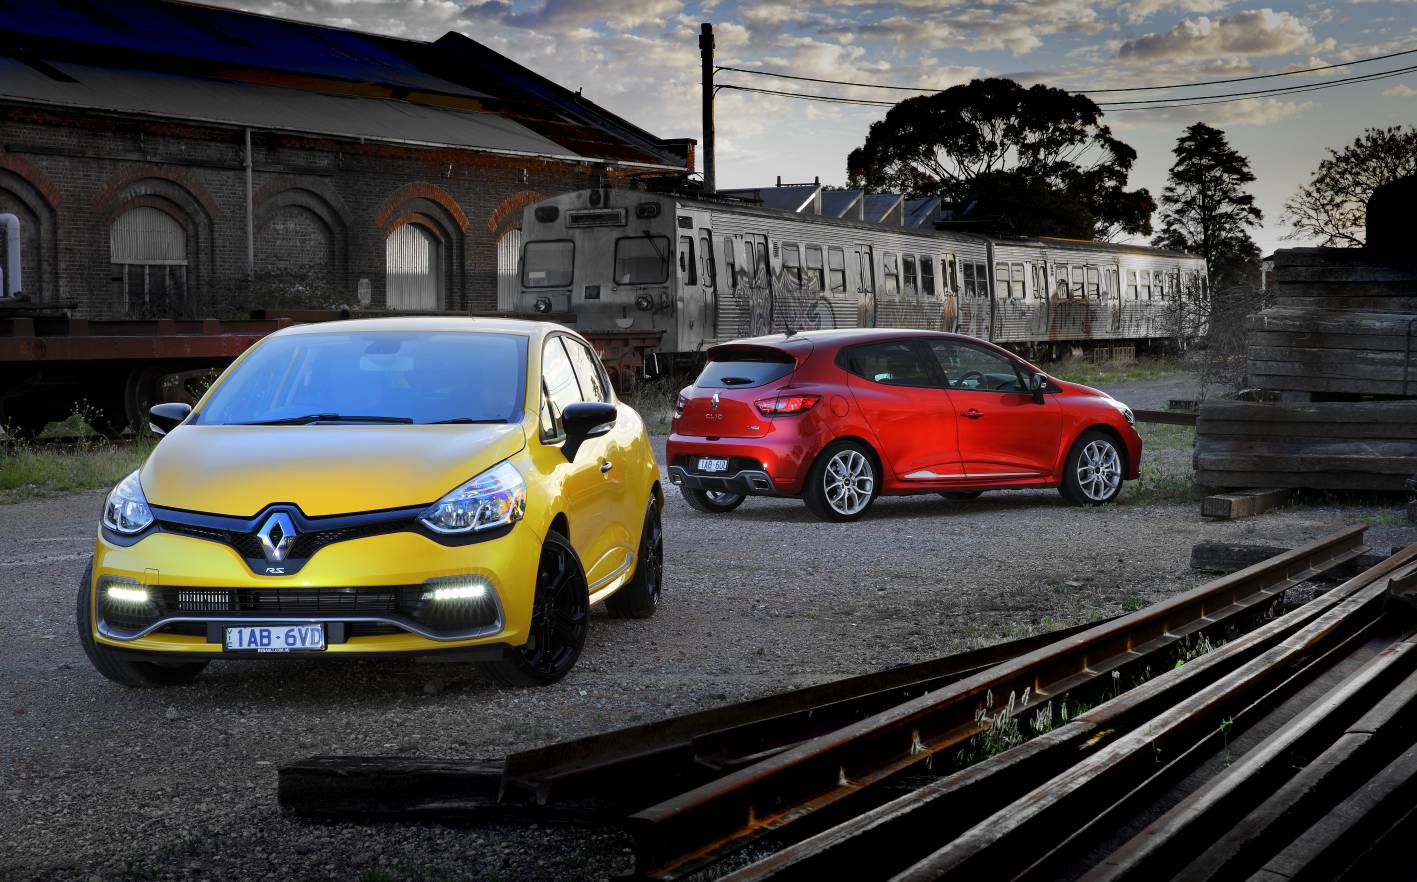 Renault Clio R.S. 200 EDC on sale in Australia from $28,790